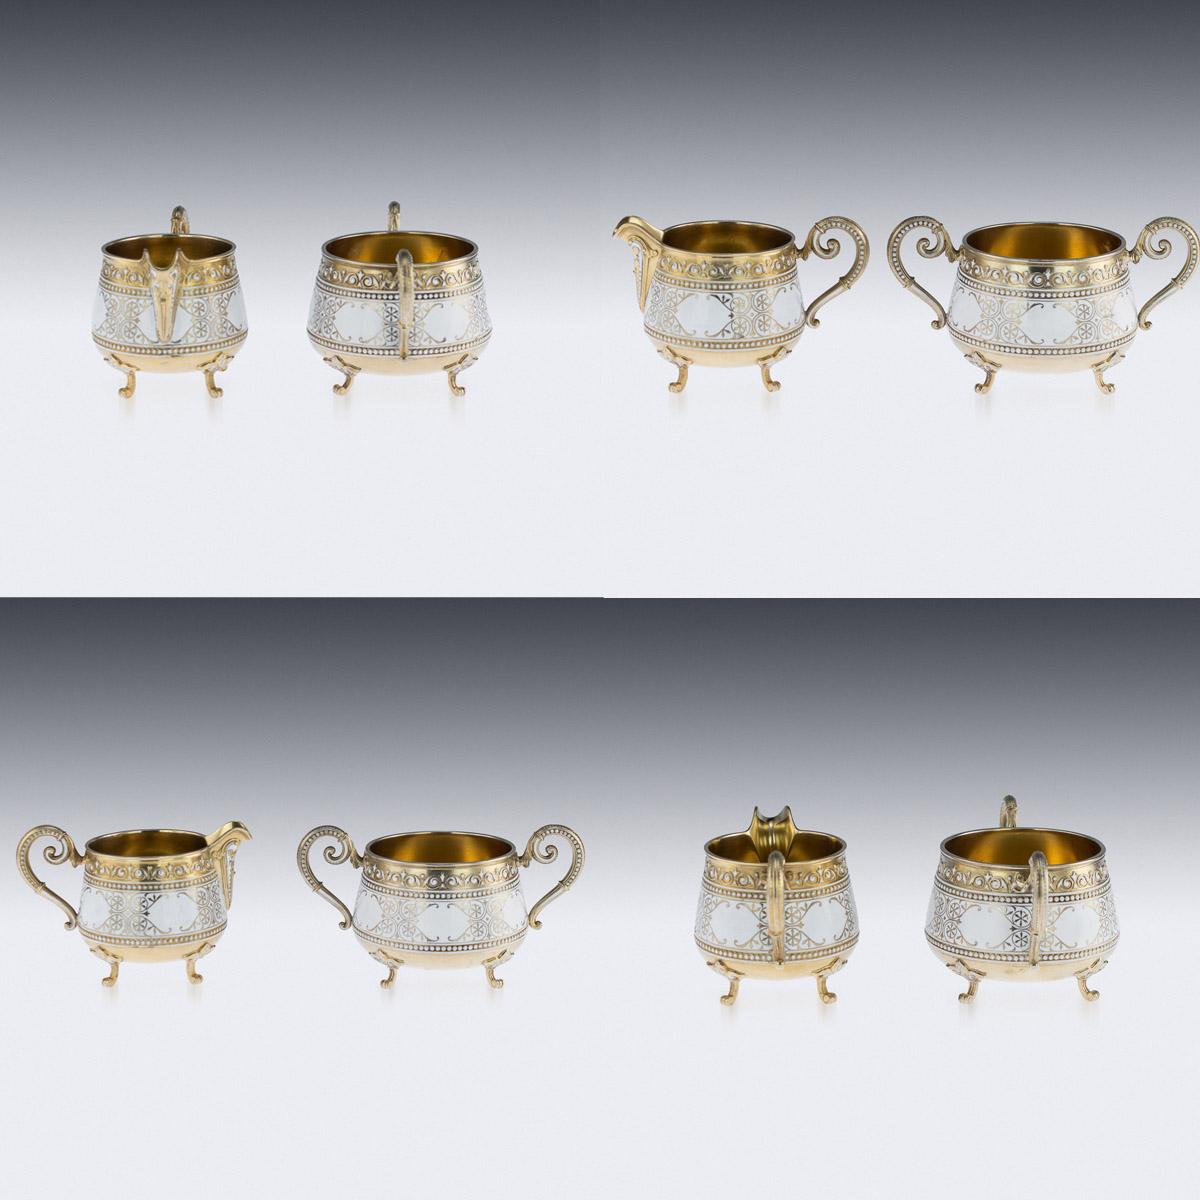 Antique 19th century Norwegian silver-gilt & cloisonneé-enamel tea service, comprised of a sugar bowl, cream jug, 12 cups, 12 saucers and 12 spoons, decorated with white enamel on floral scrolls, with white intertwining and beaded boarders on